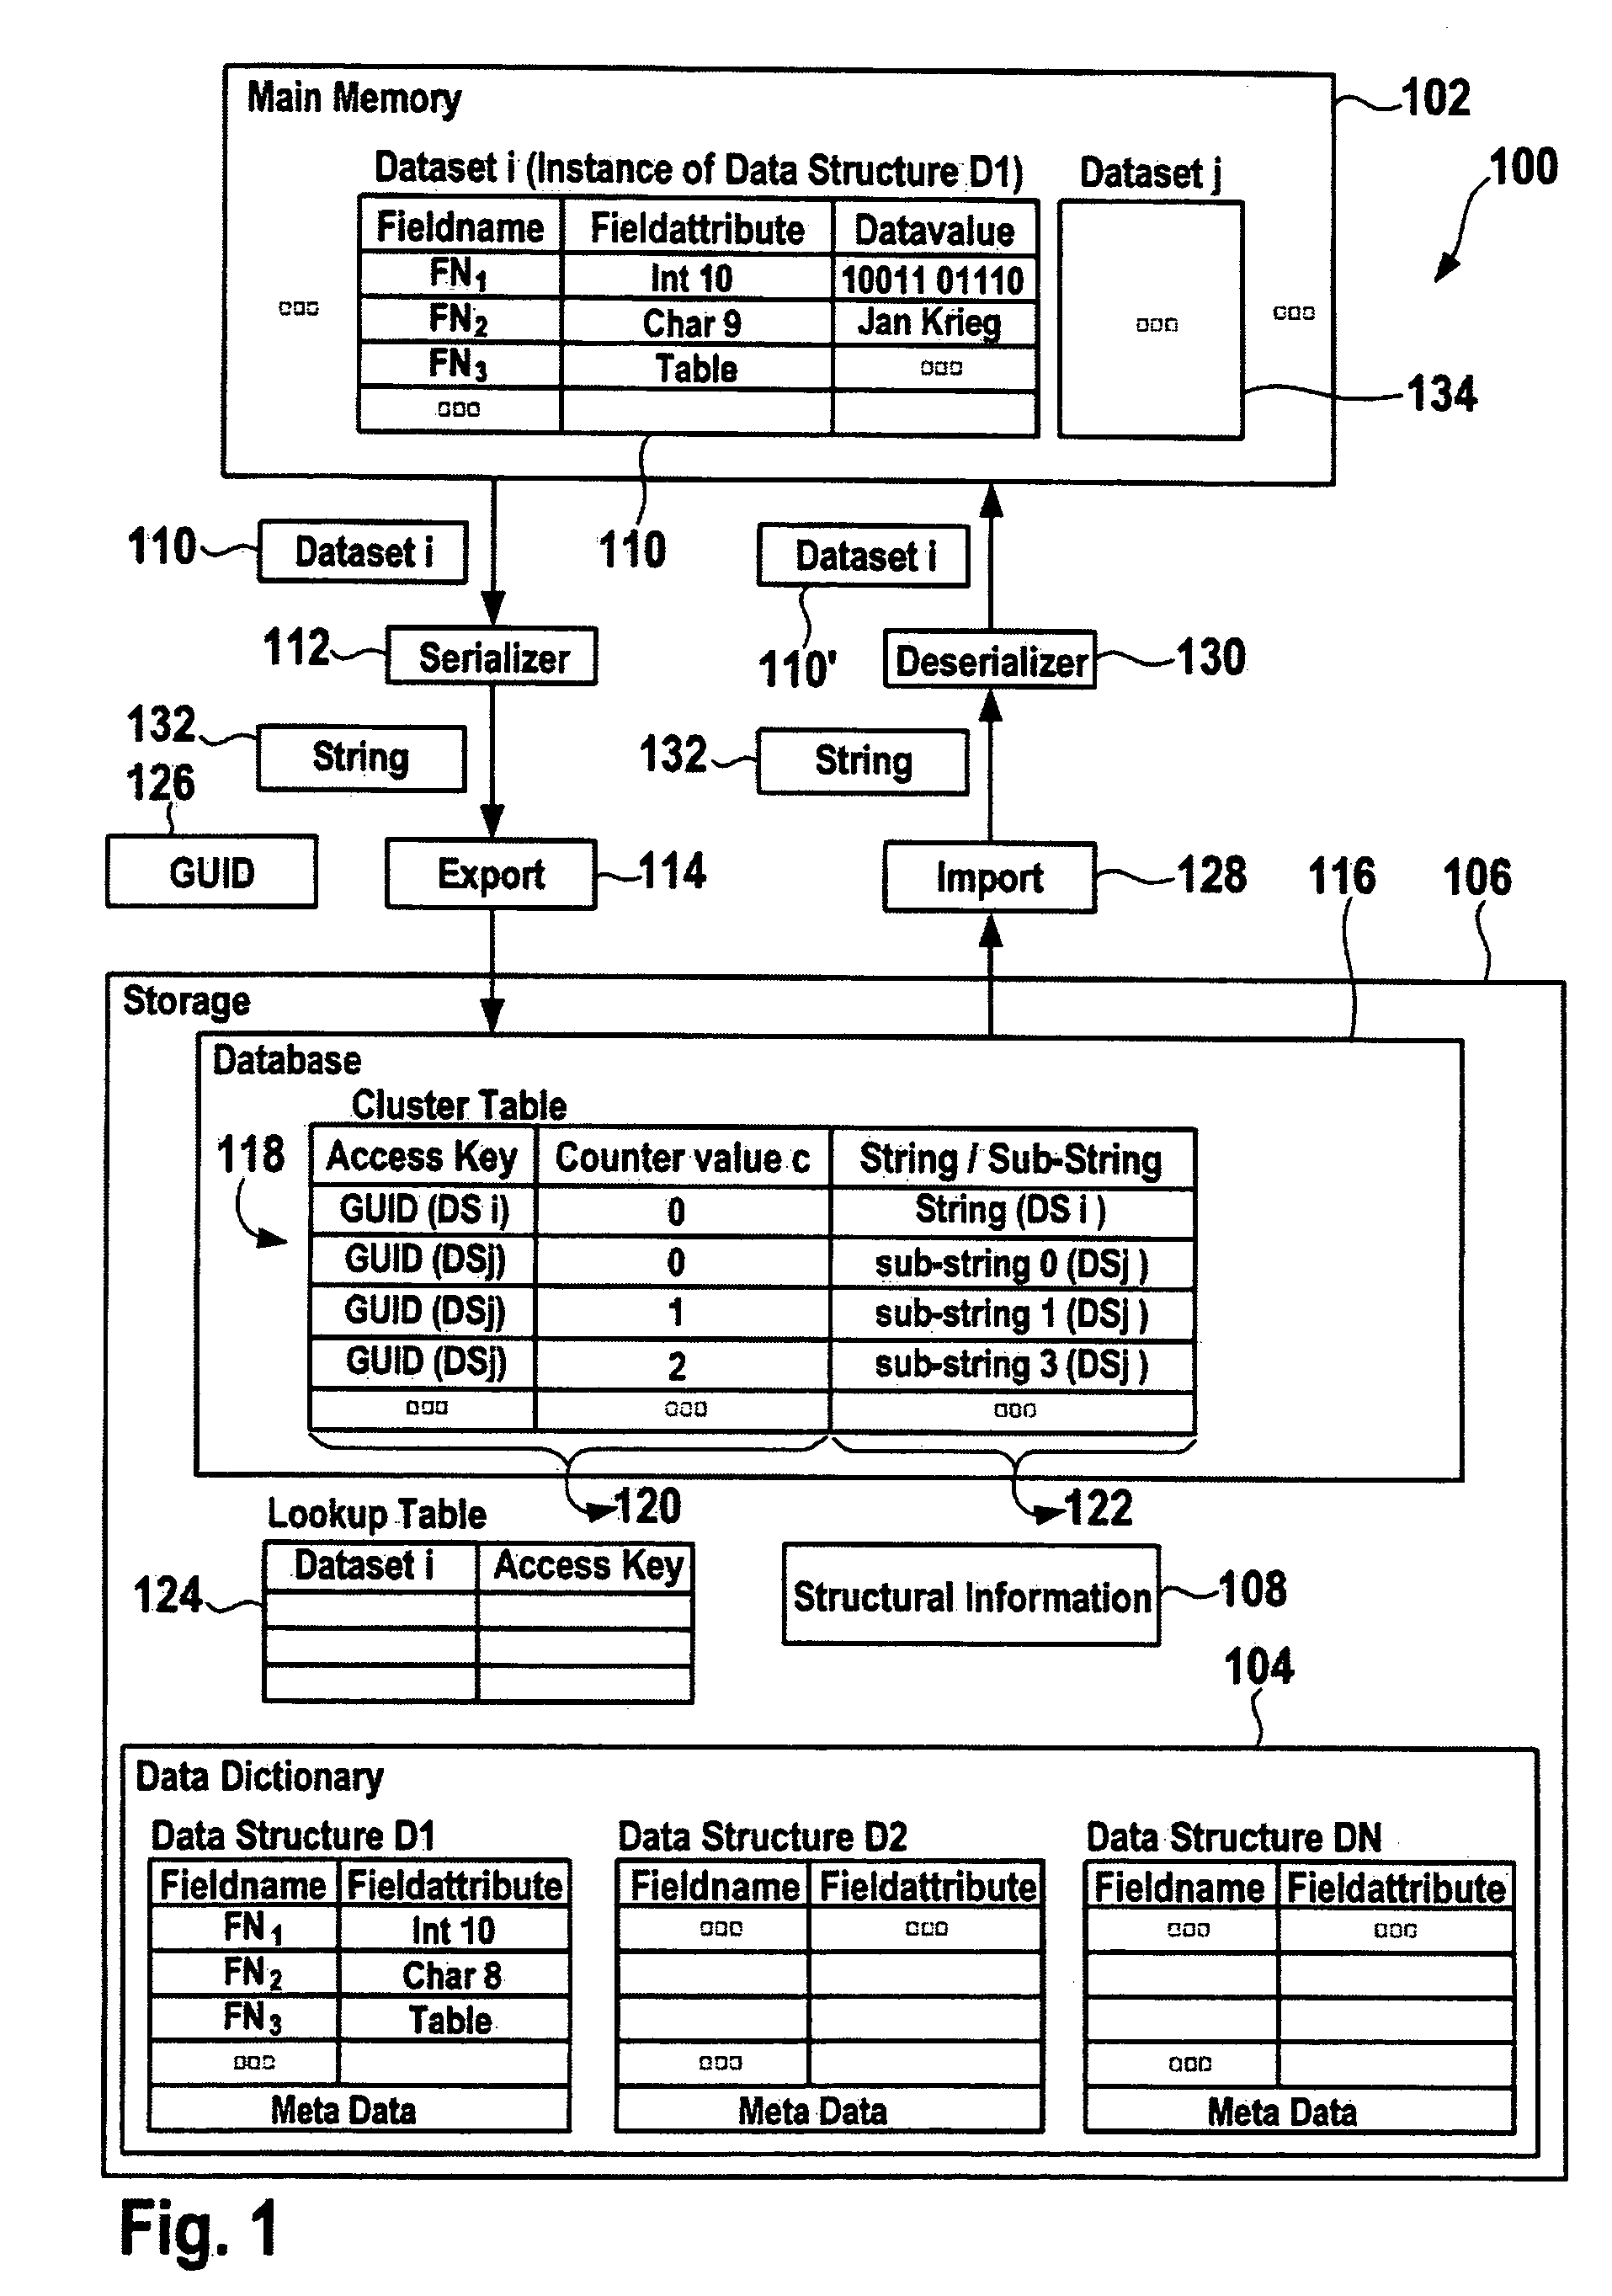 Systems and methods for storing a dataset having a hierarchical data structure in a database